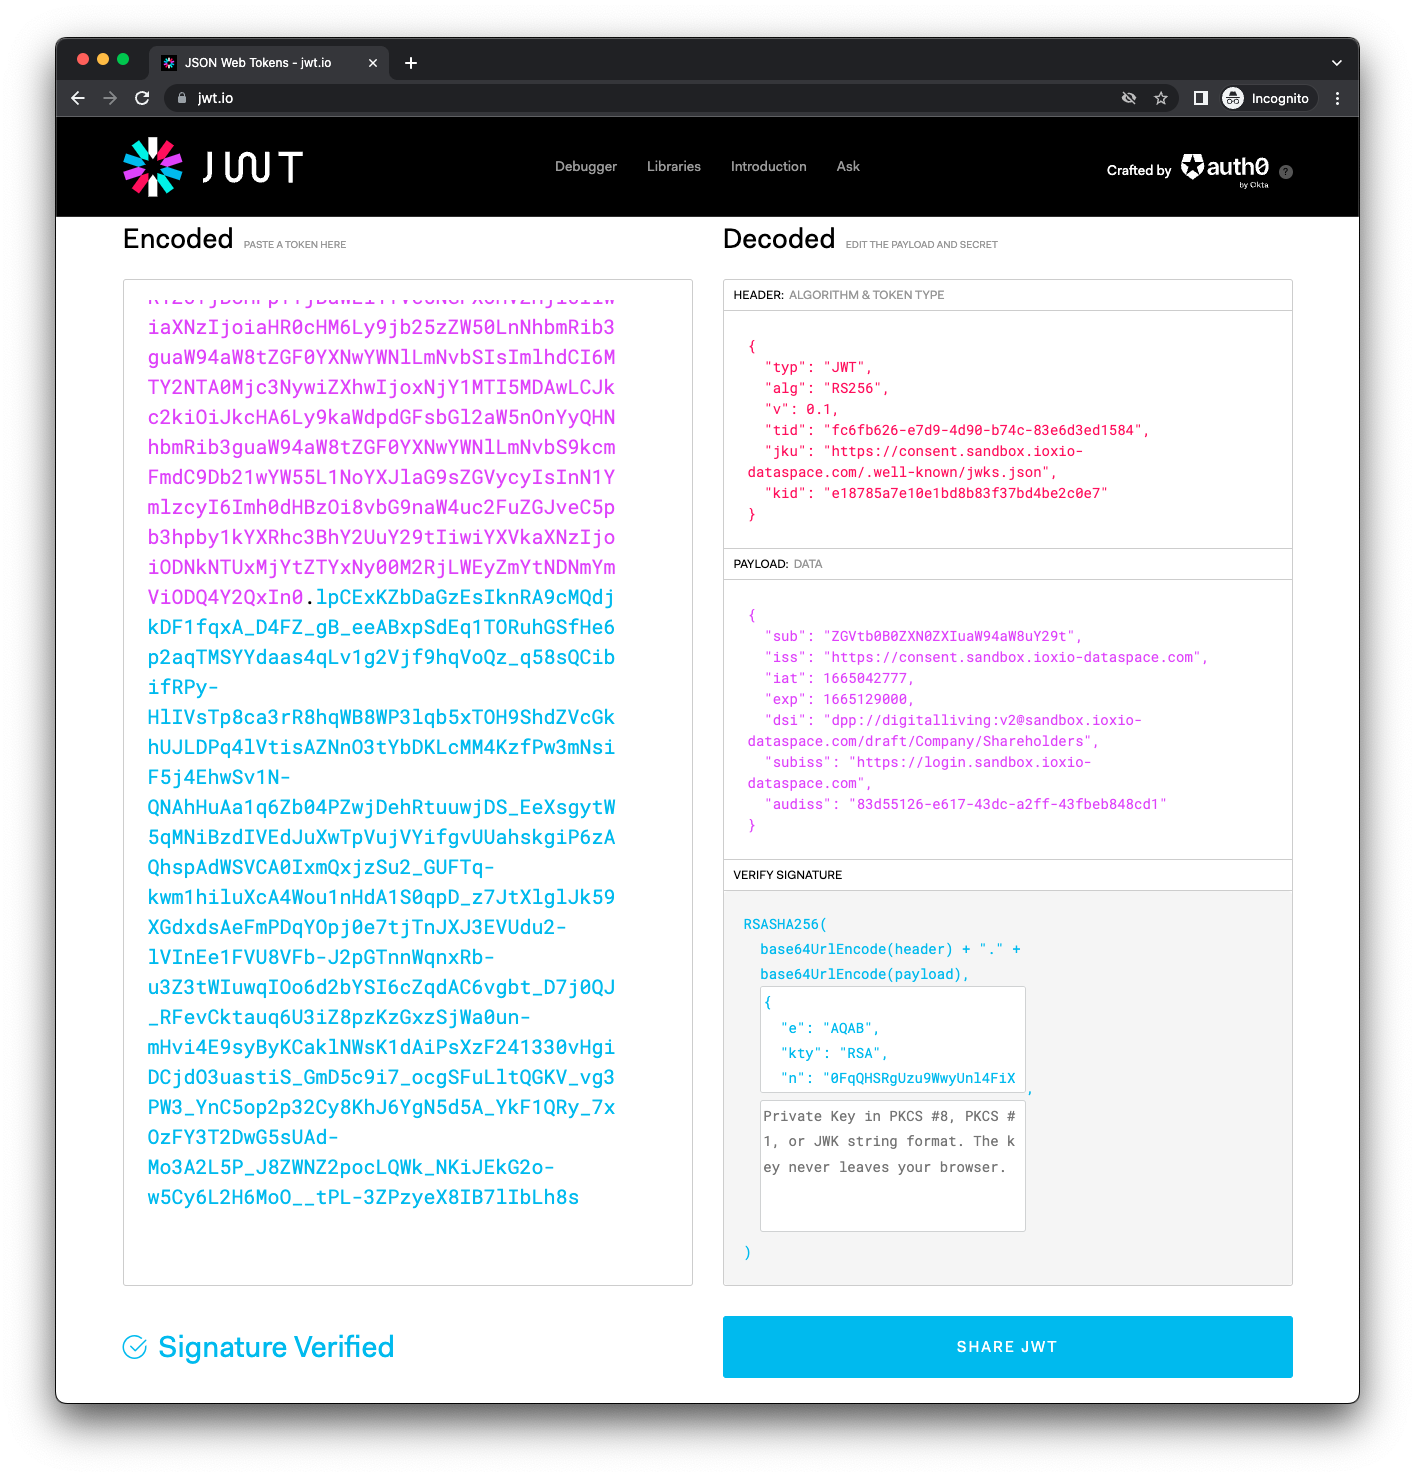 Screenshot of the consent token when viewed at jwt.io